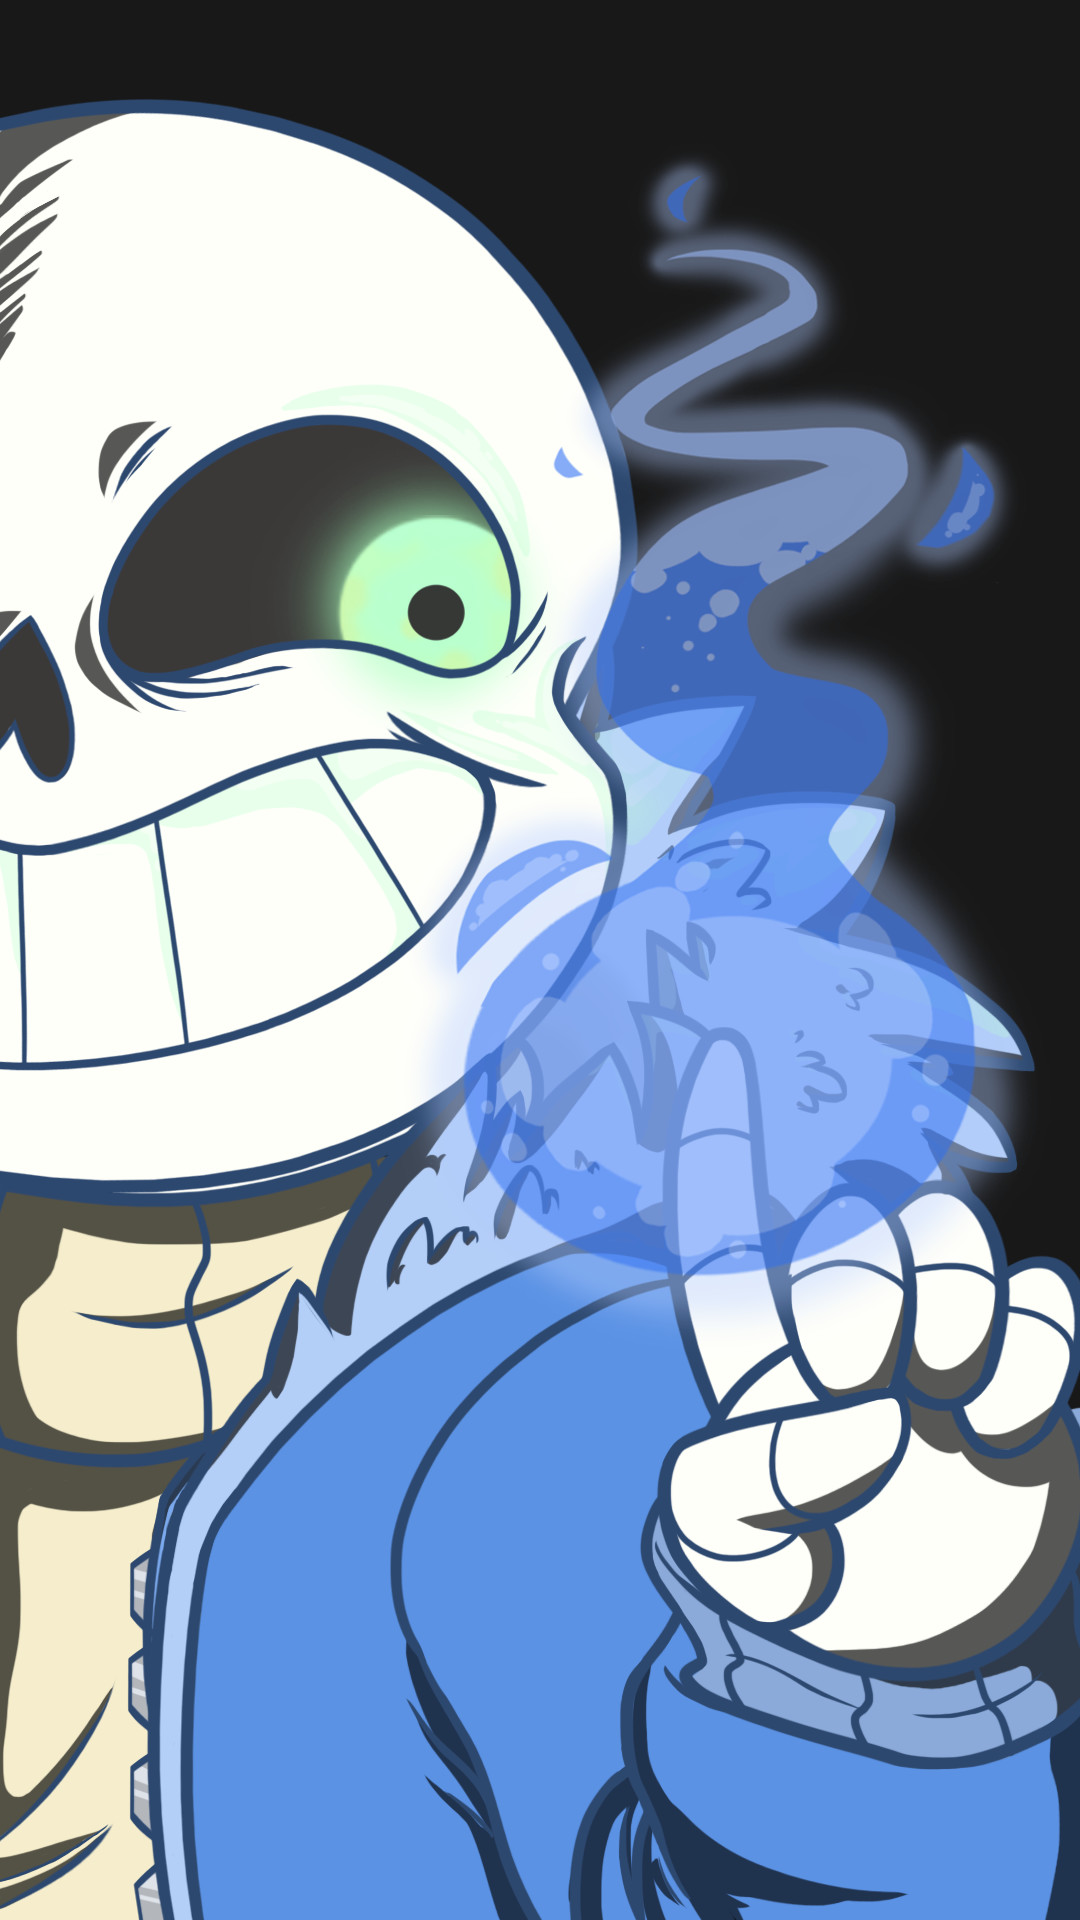 1080x1920 bluasis: “My brother asked for a Sans wallpaper for his iPhone c: ”